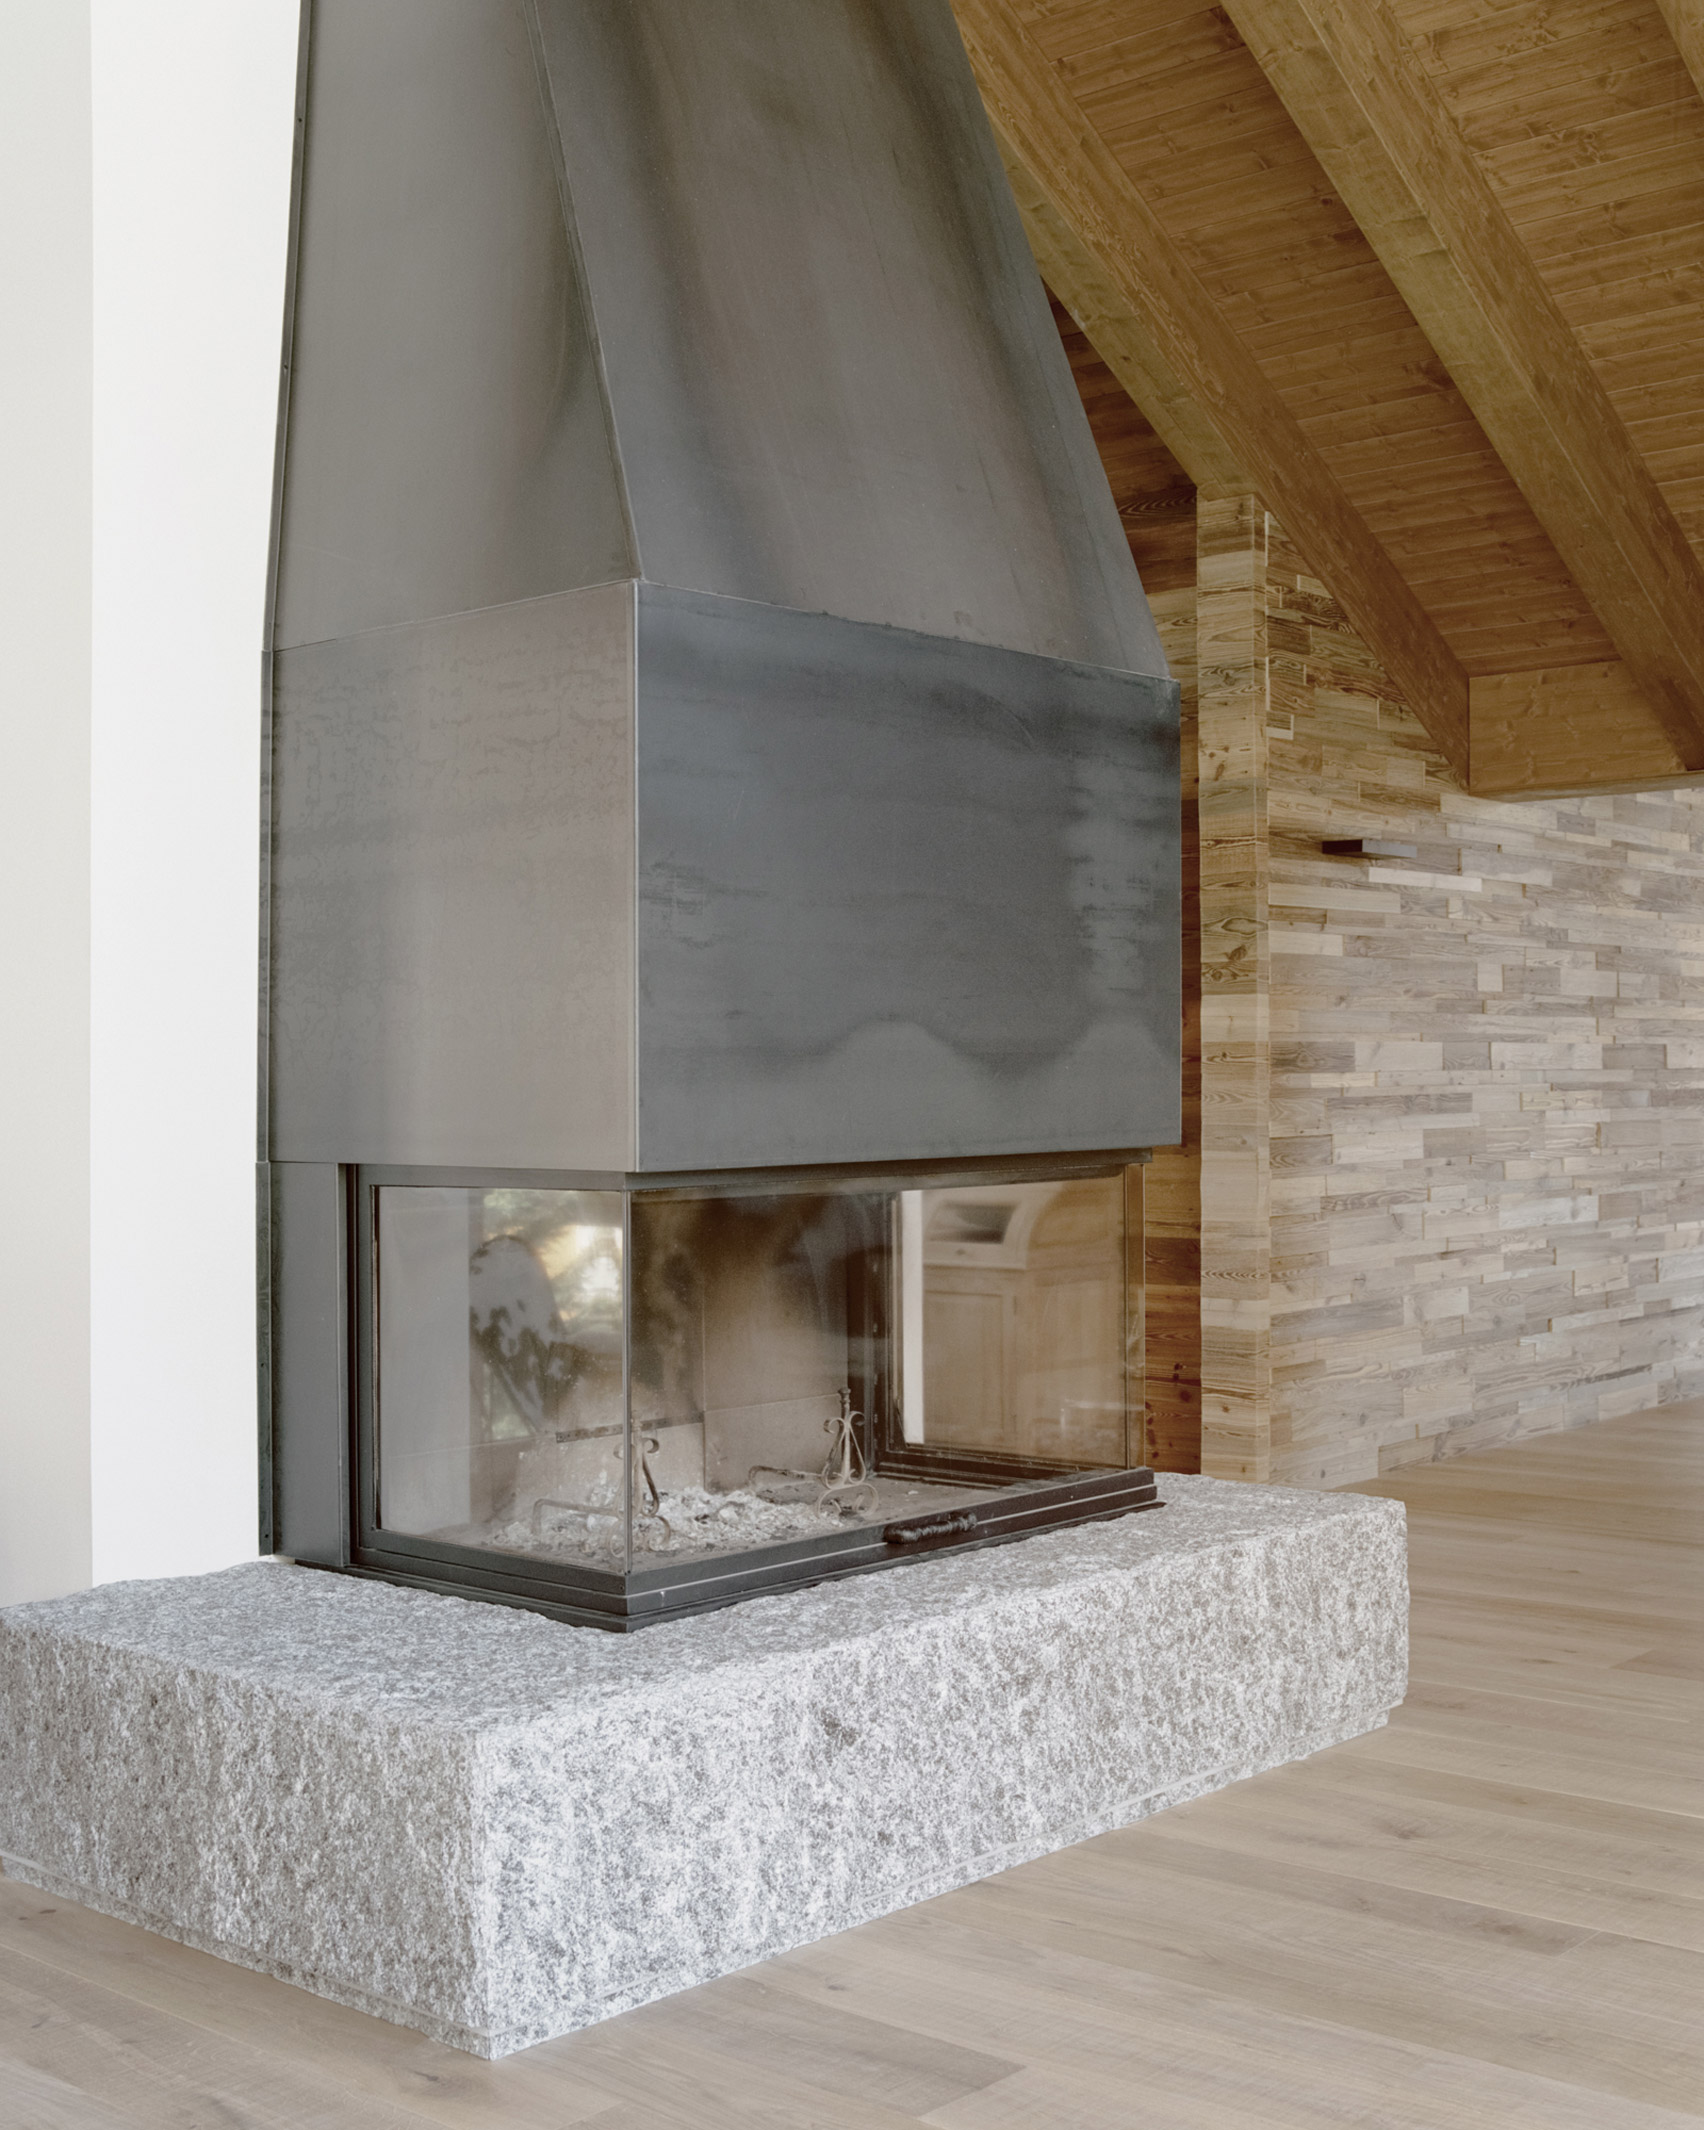 A fireplace inside an Italian chalet by LCA Architetti